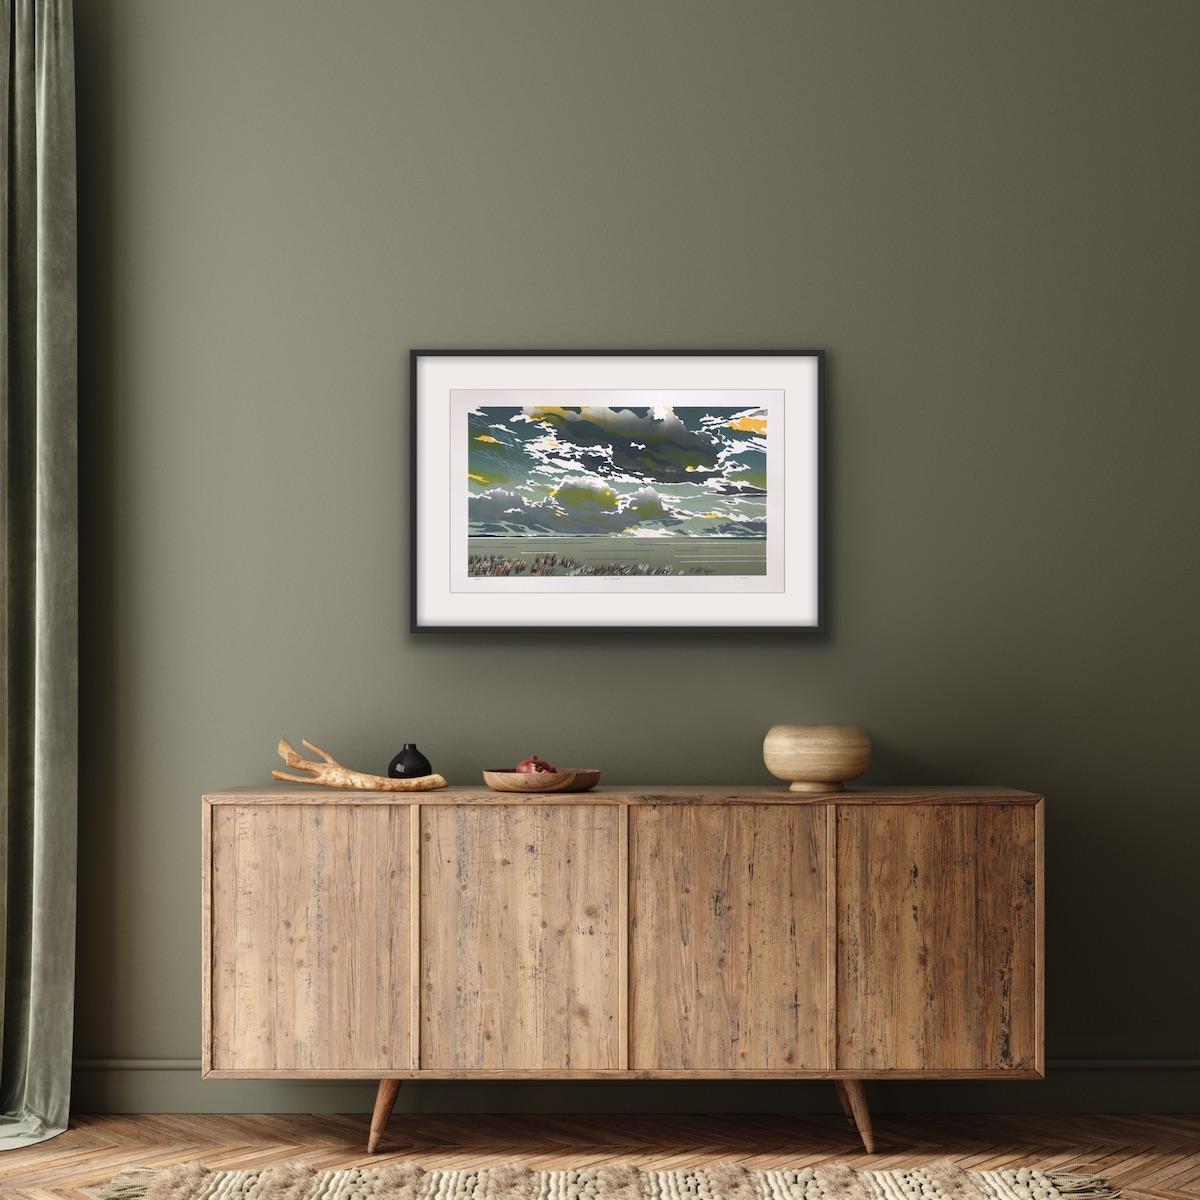 The Lost Ball, Contemporary Norfolk Landscape Art, Seascape Art, Blue Art - Print by Colin Moore